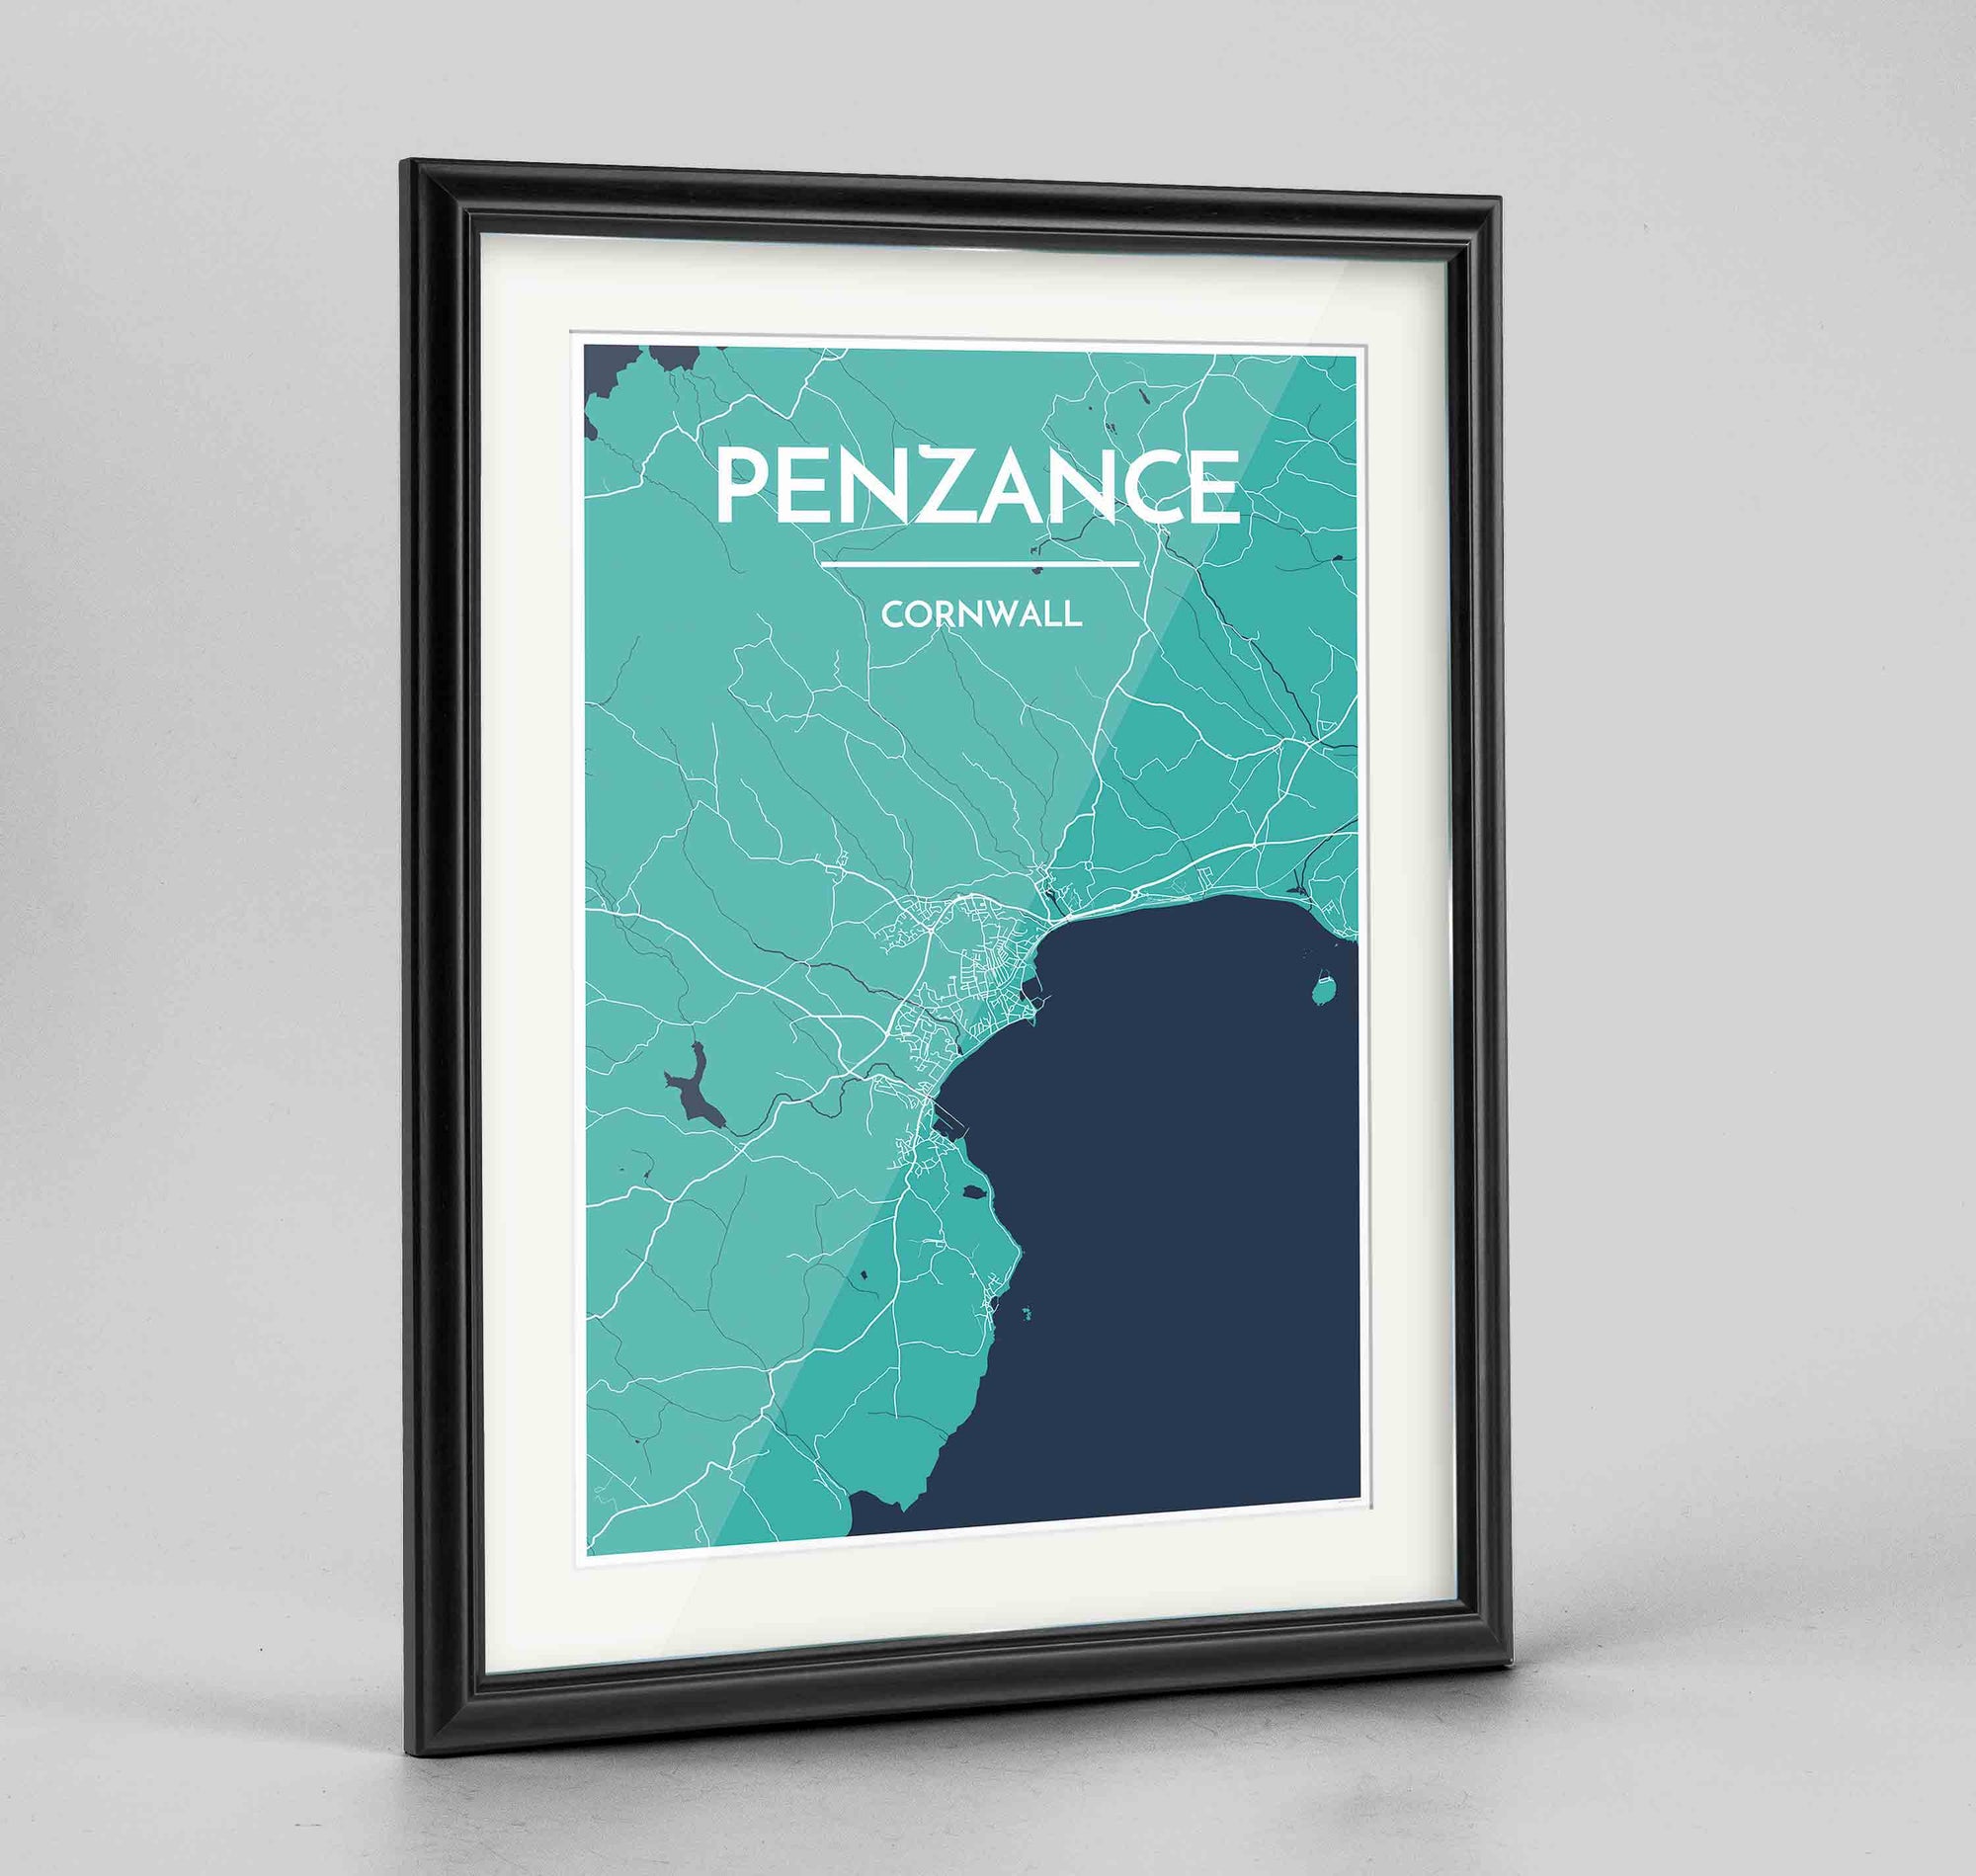 Framed Penzance Map Art Print 24x36" Traditional Black frame Point Two Design Group